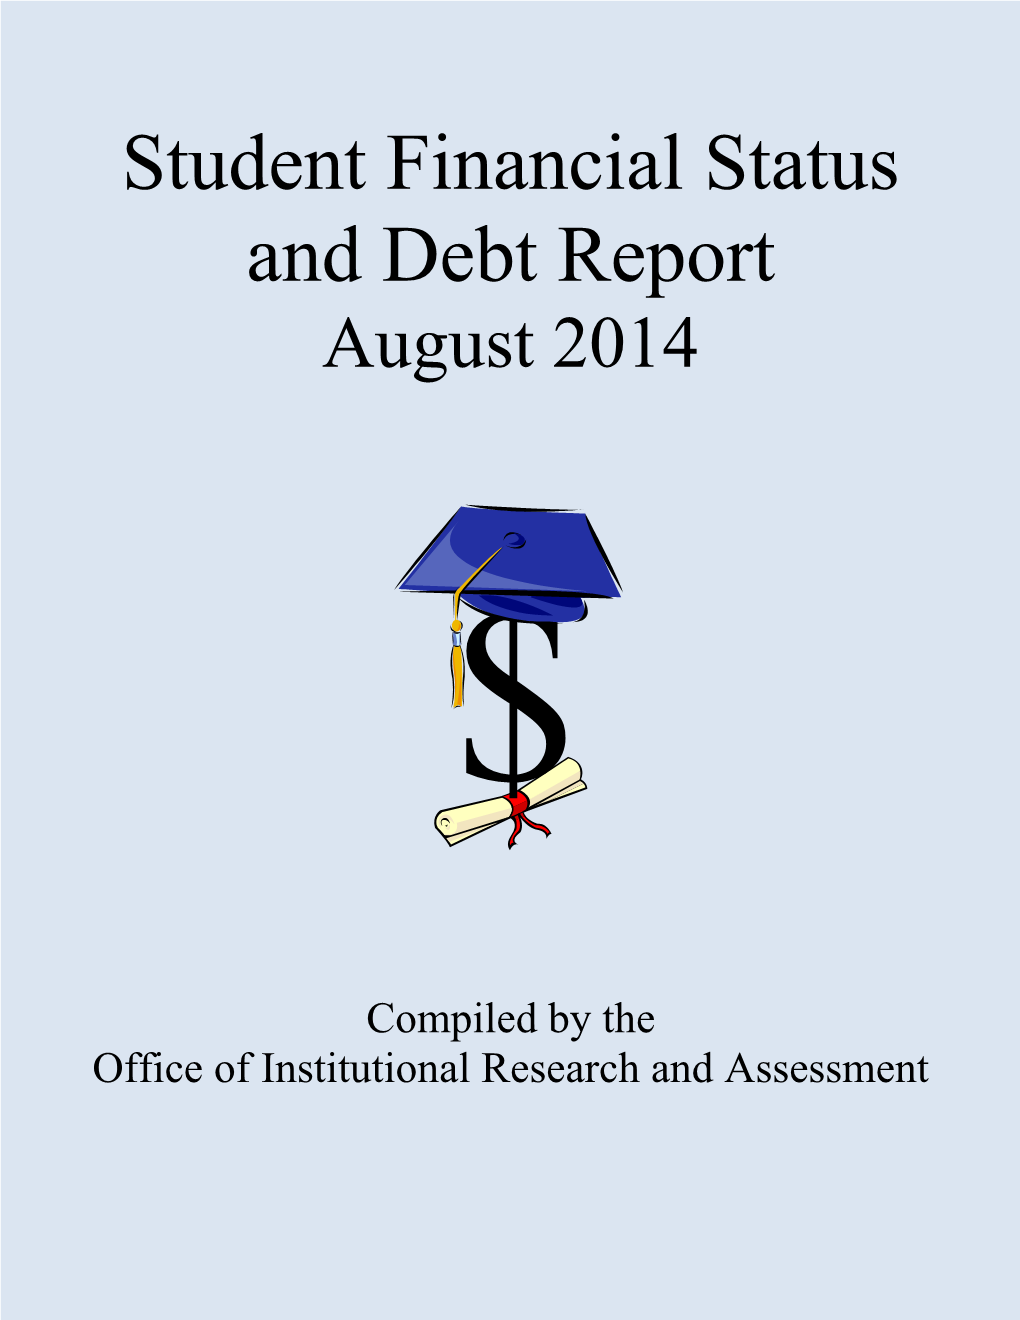 Student Financial Status and Debt Report August 2014